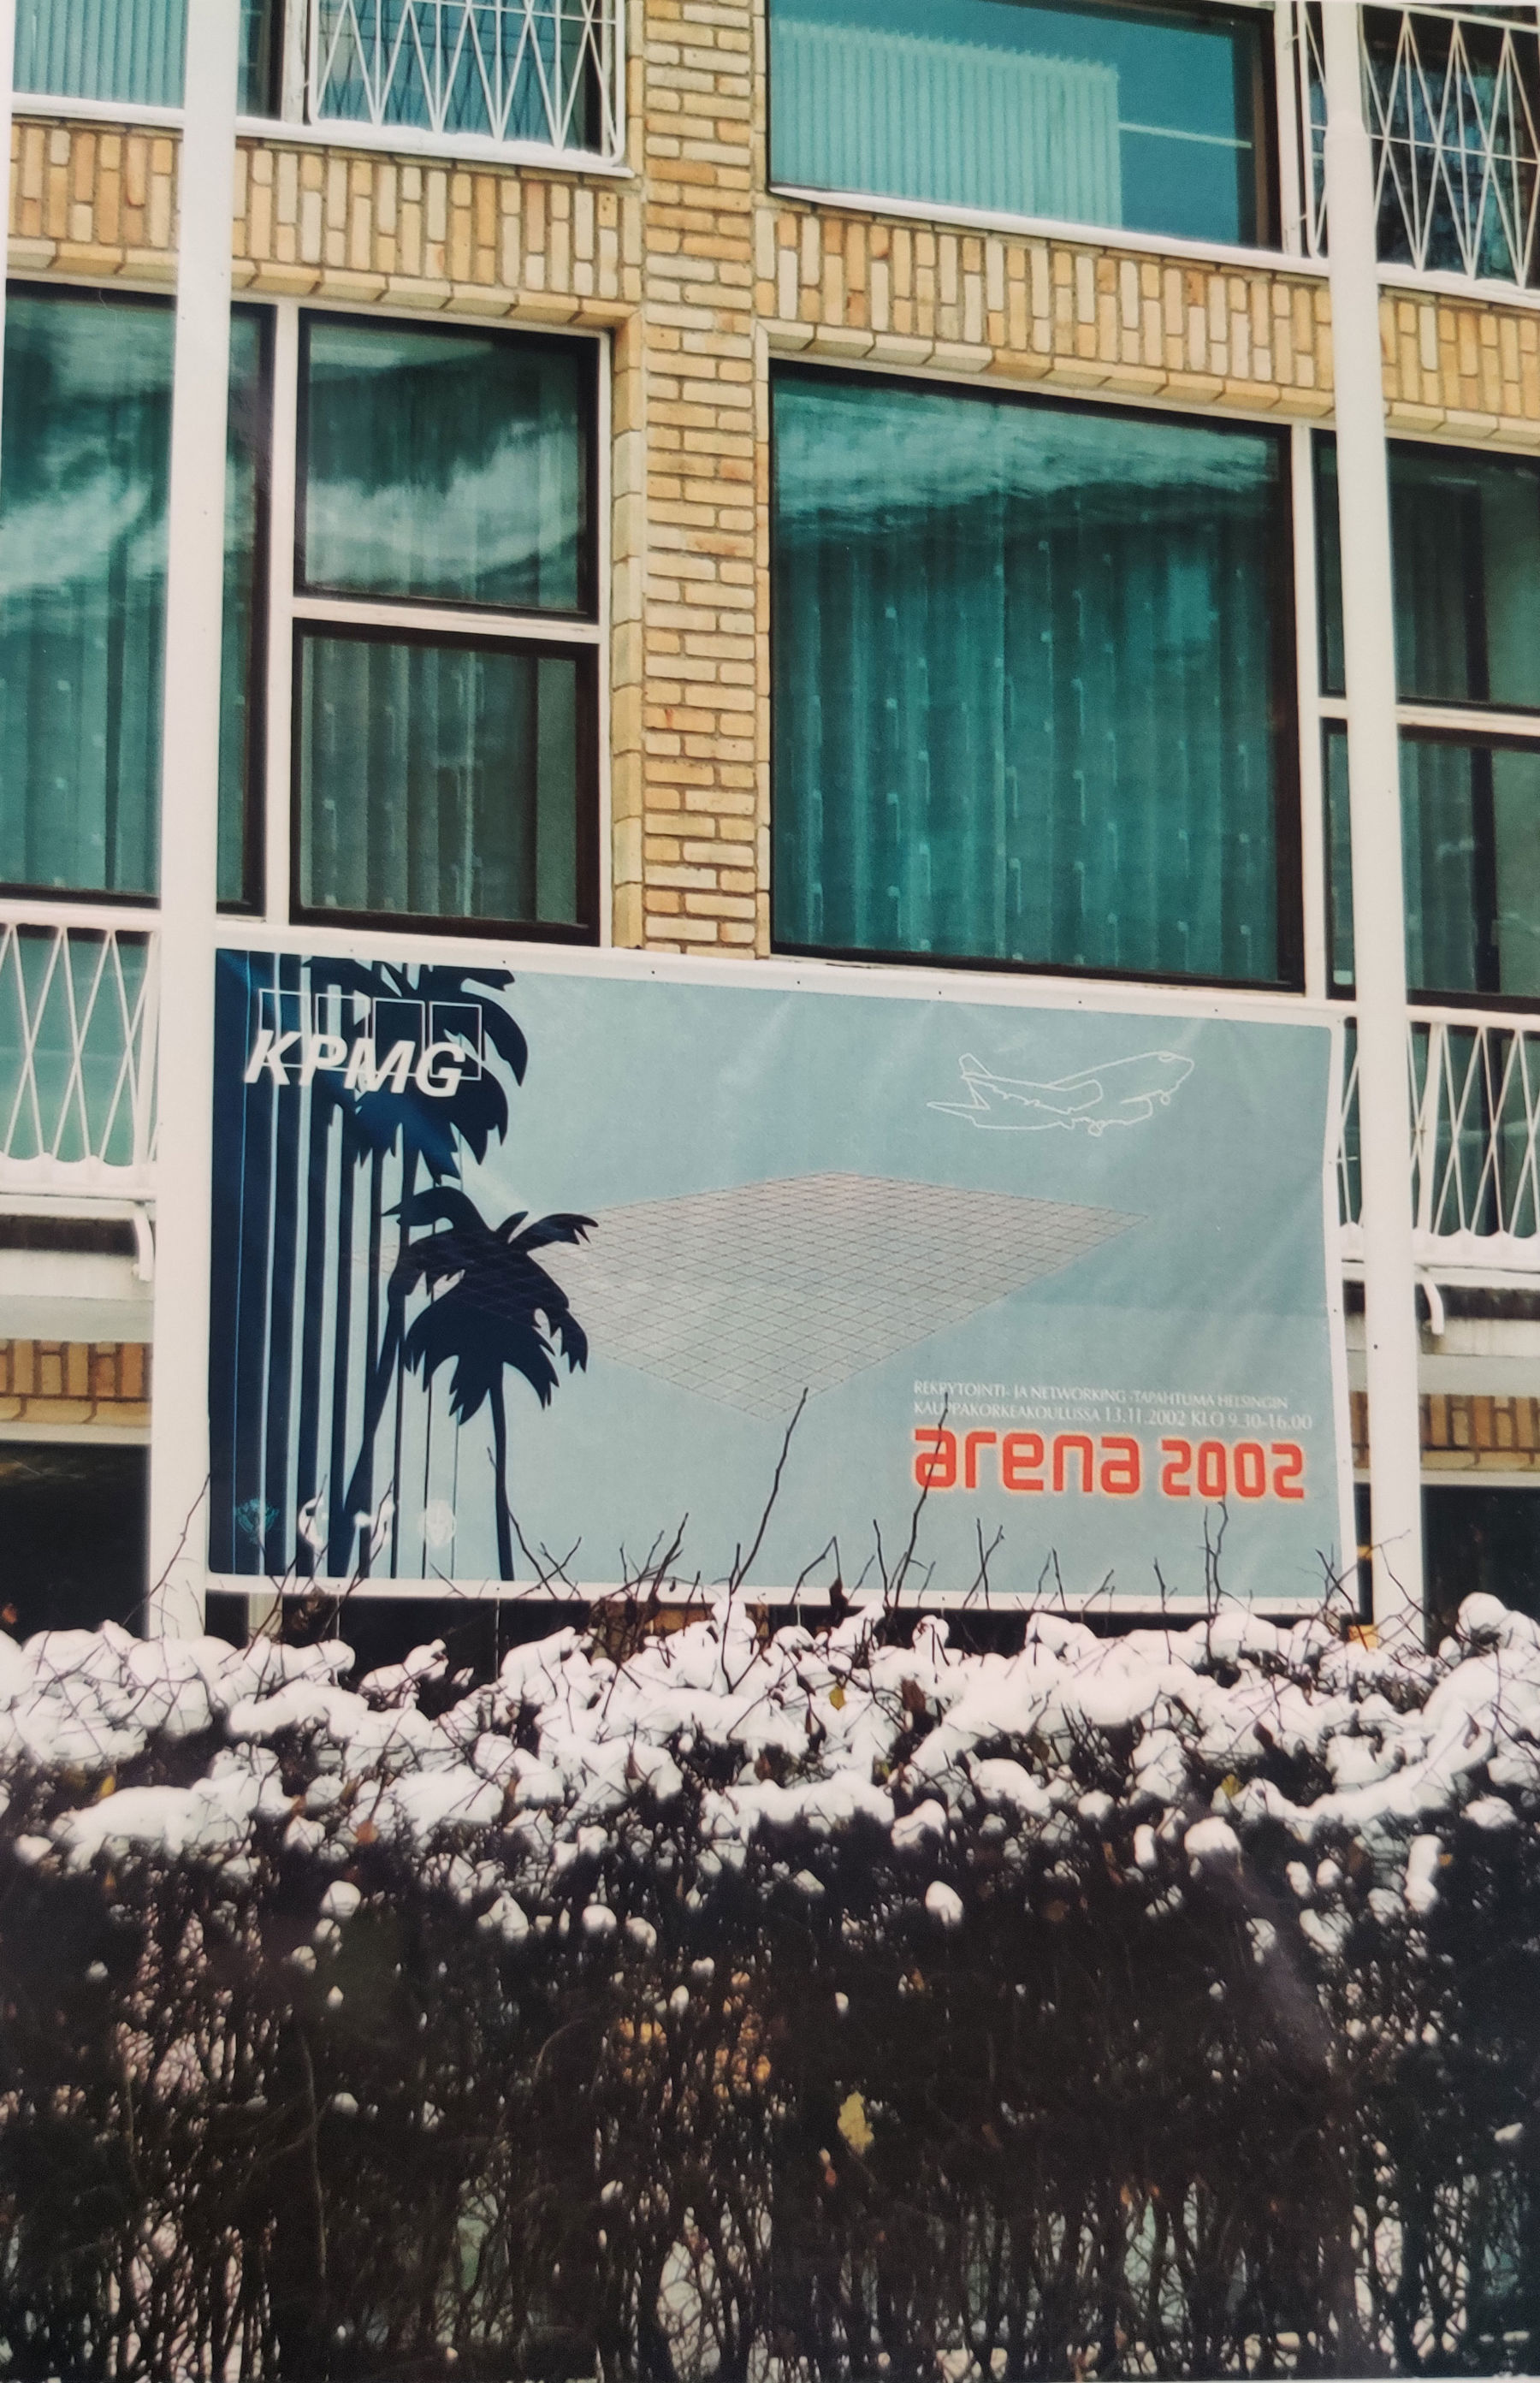 Picture of a building wall, with a billboard ad of an airplane, palm trees and texts KPMG and ARENA 2002.